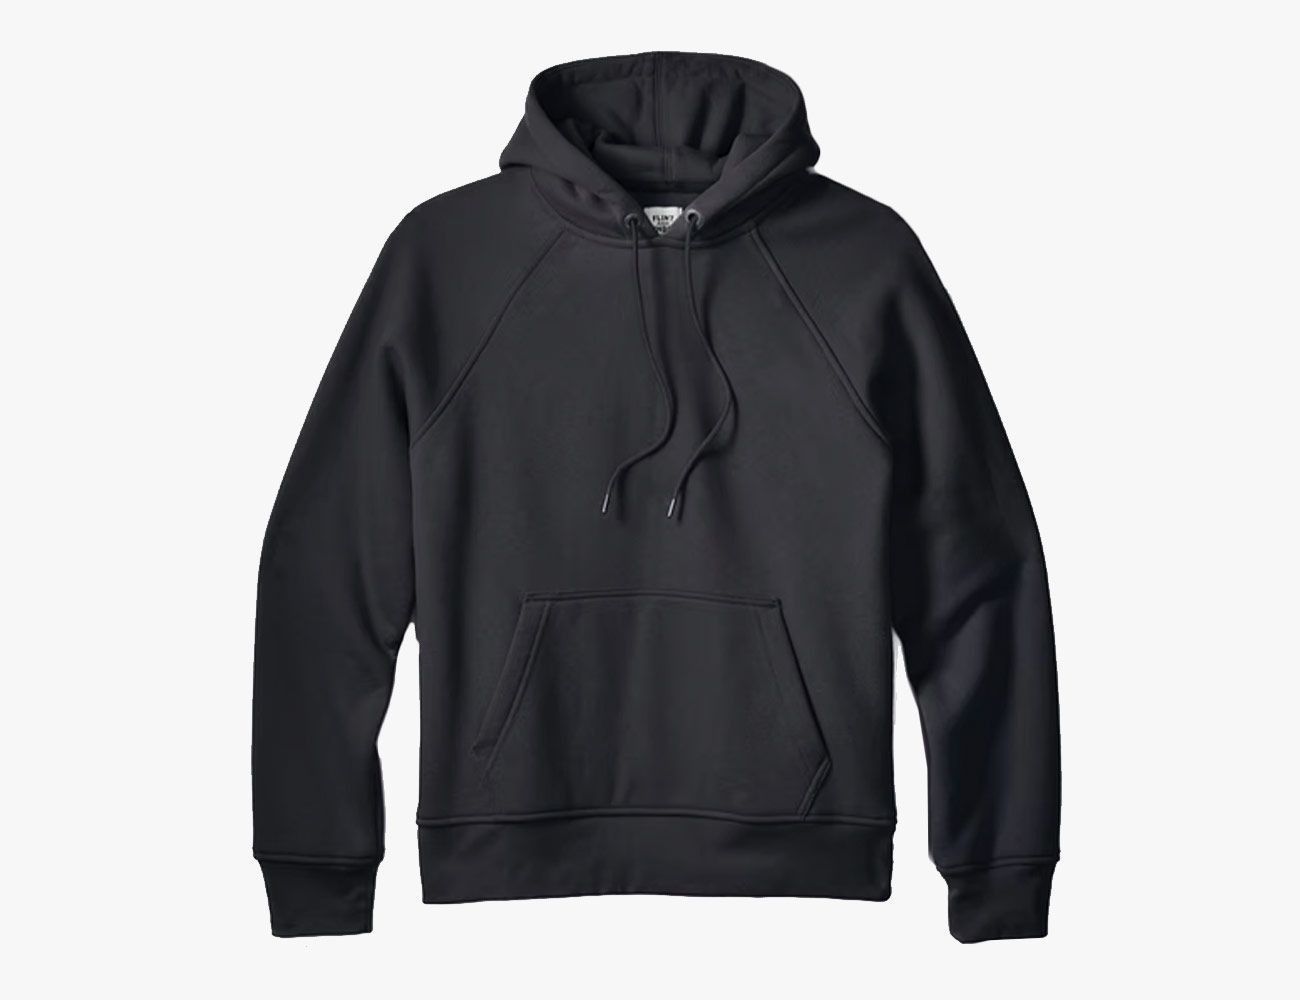 klarhed Meyella Patent The Best Hoodies for Men Balance Comfort and Style